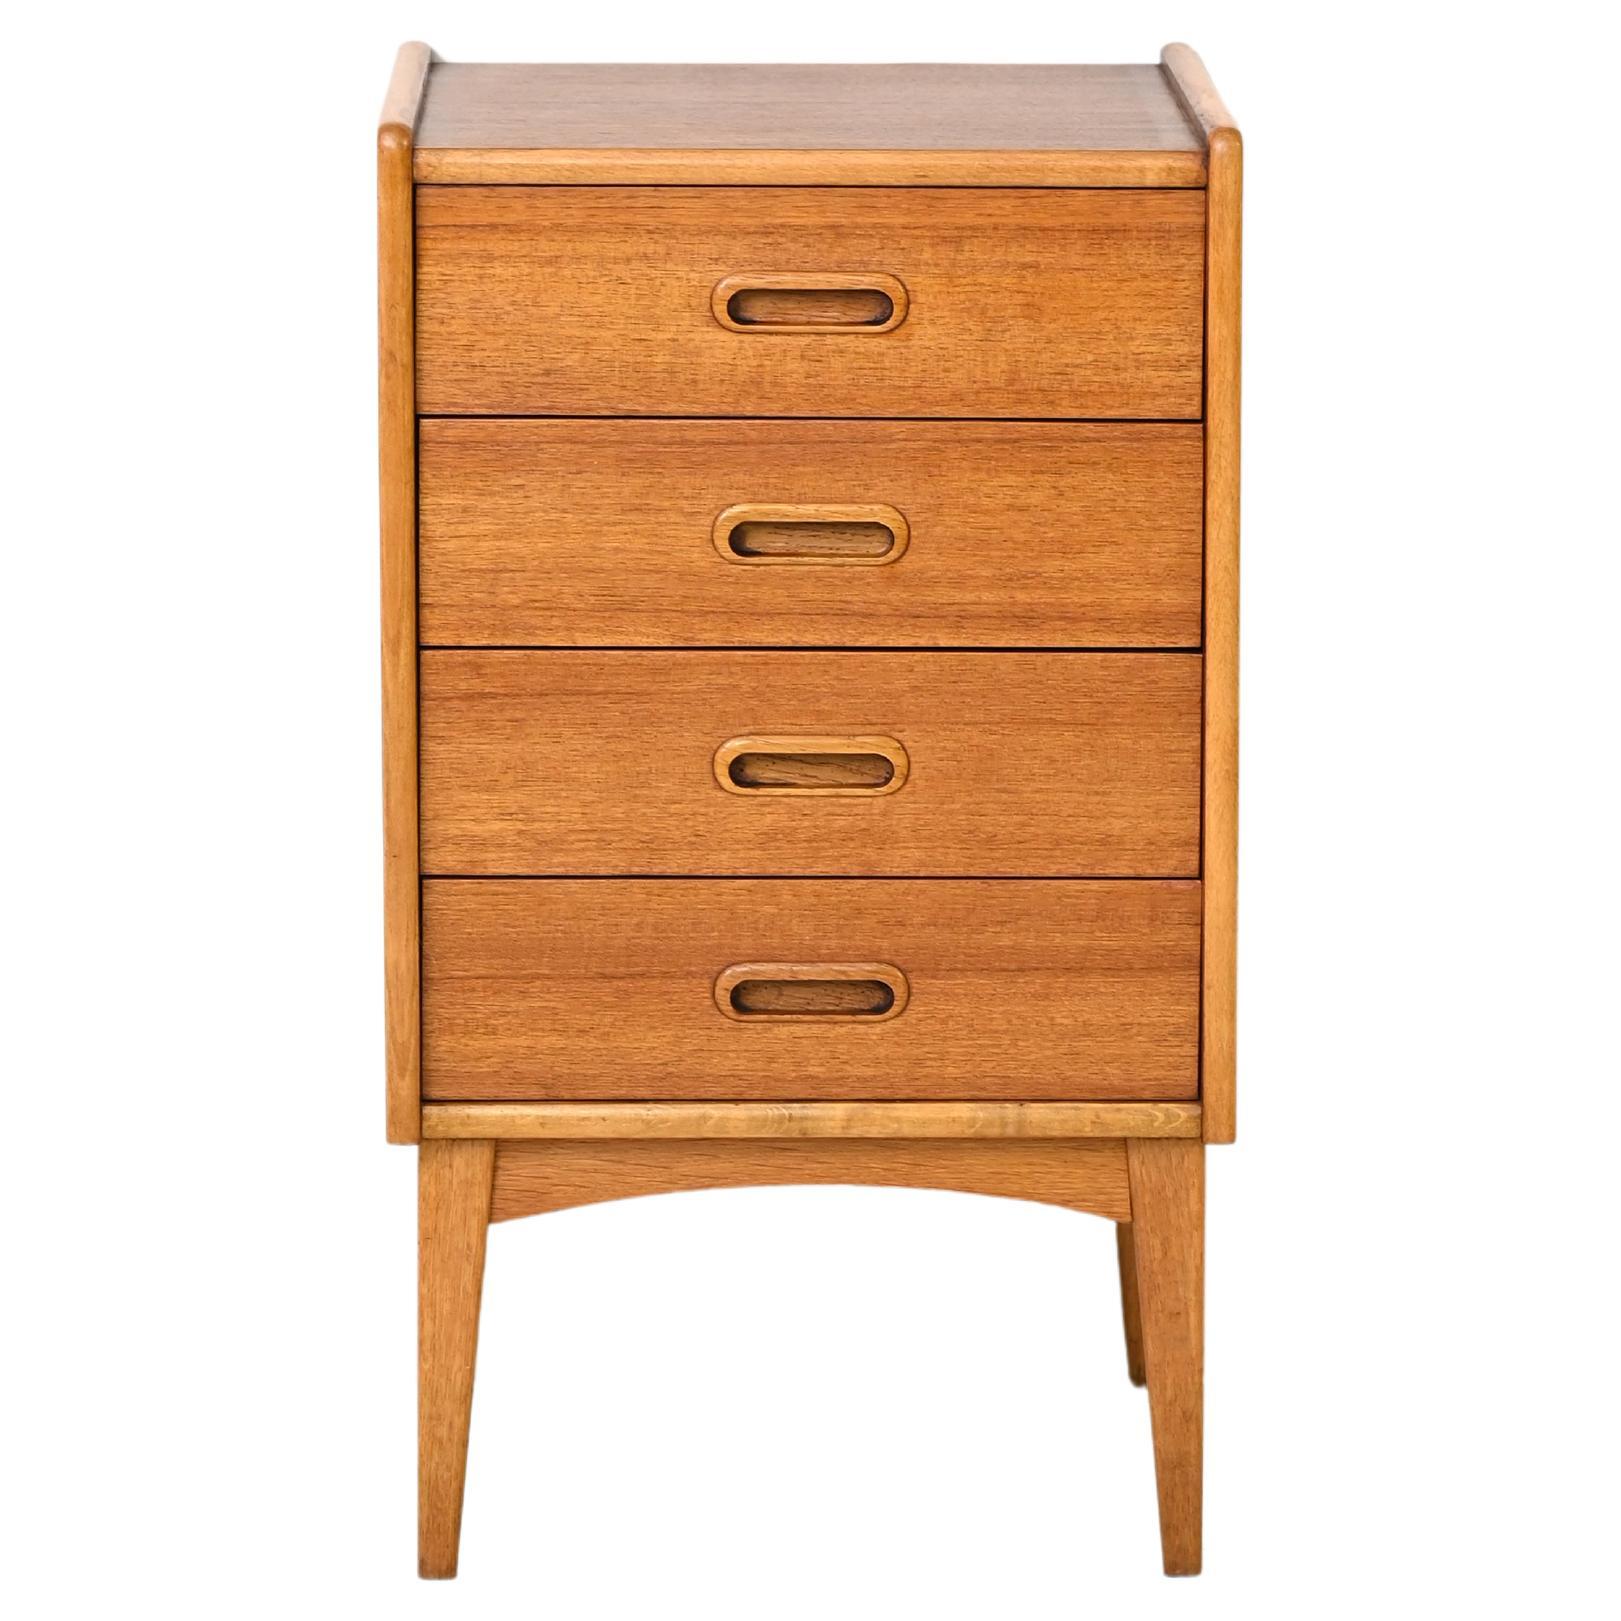 Small Chest of Drawers, Bedside Table of Swedish Modernism